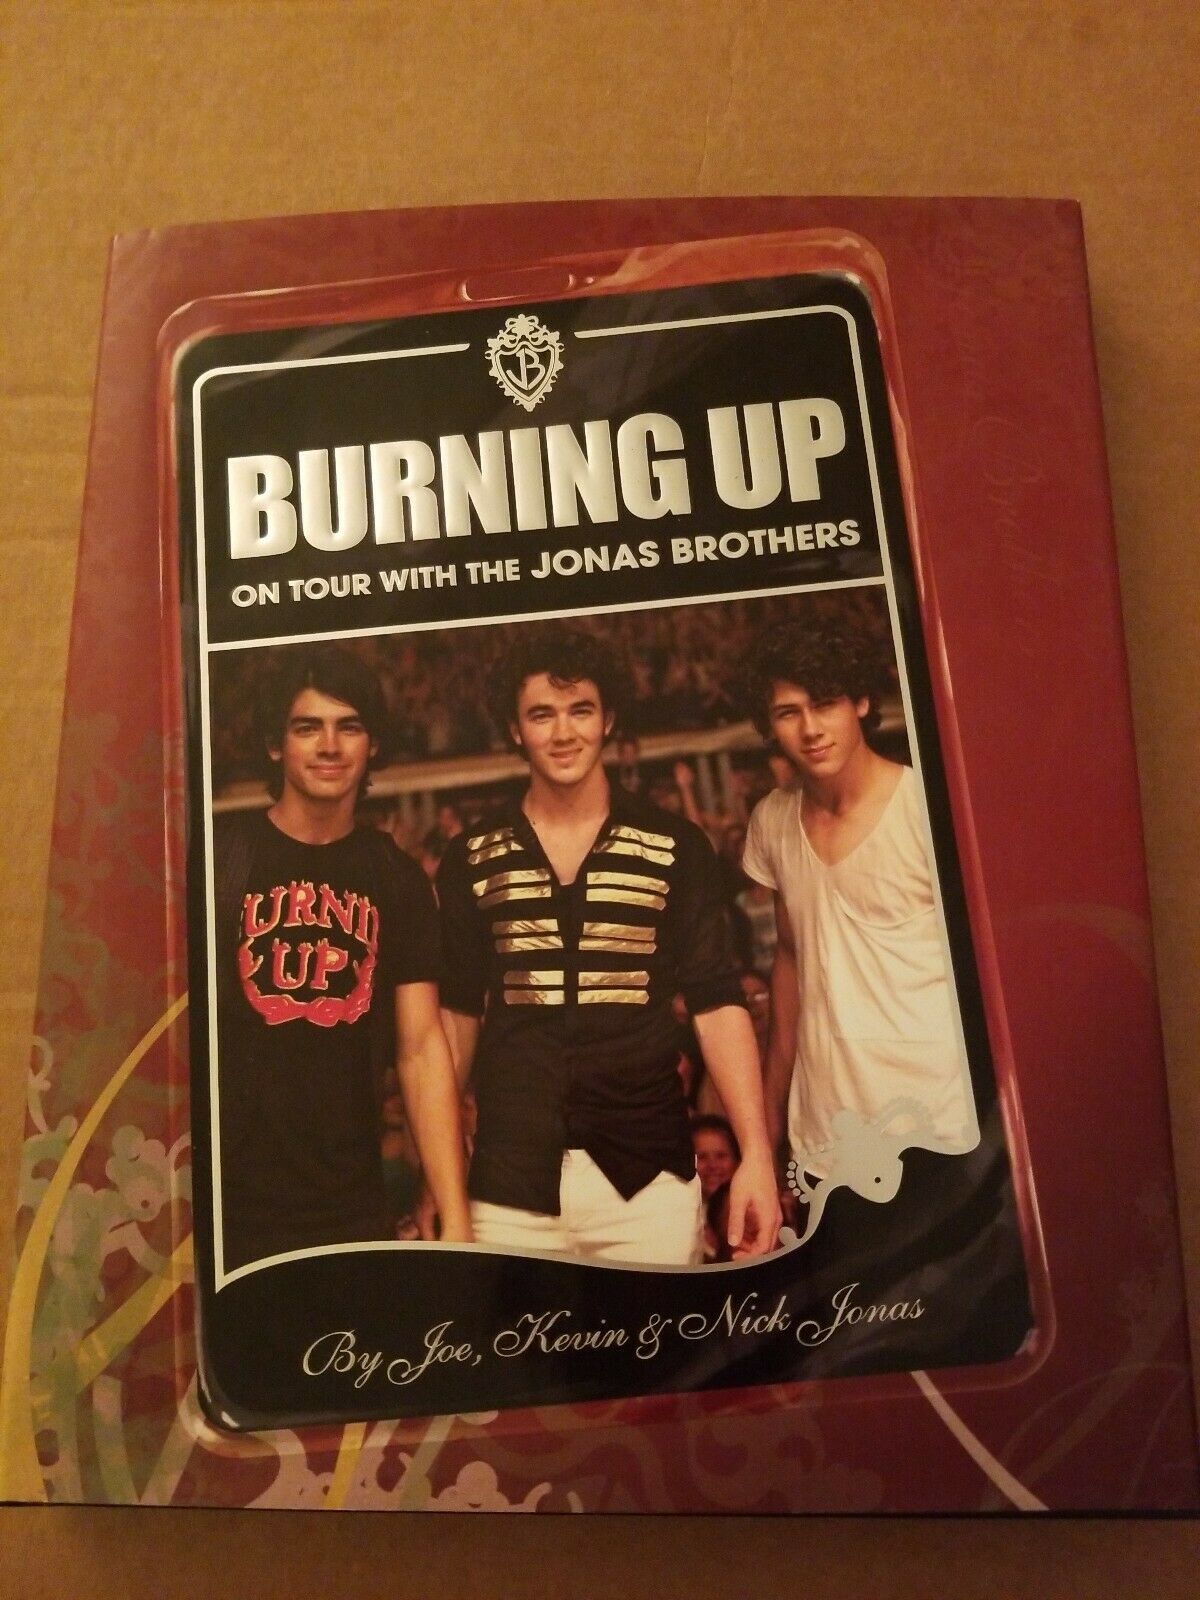 Burnining Up On Tour With The Jonas Brothers Disney Hardcover Book 2008